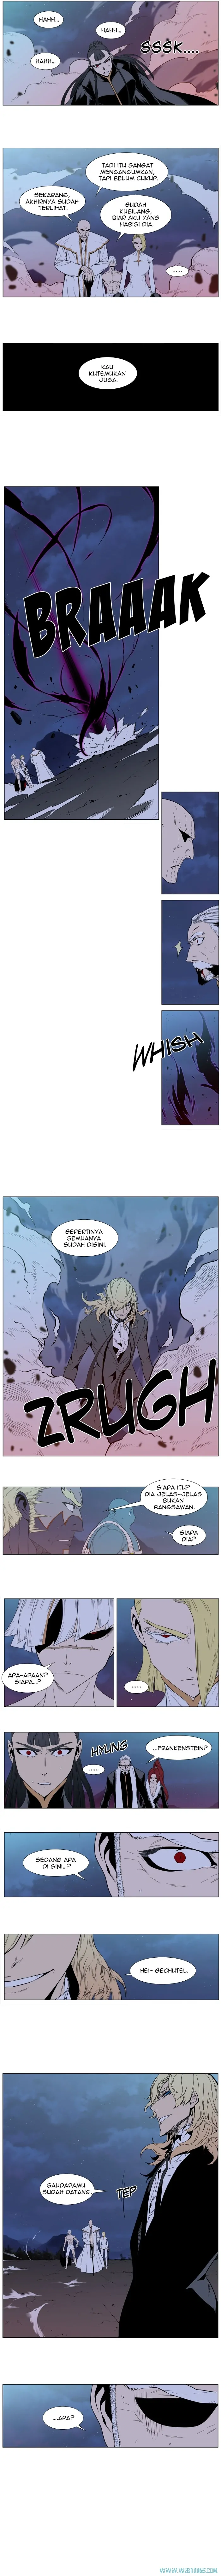 Noblesse Chapter 390 - 39